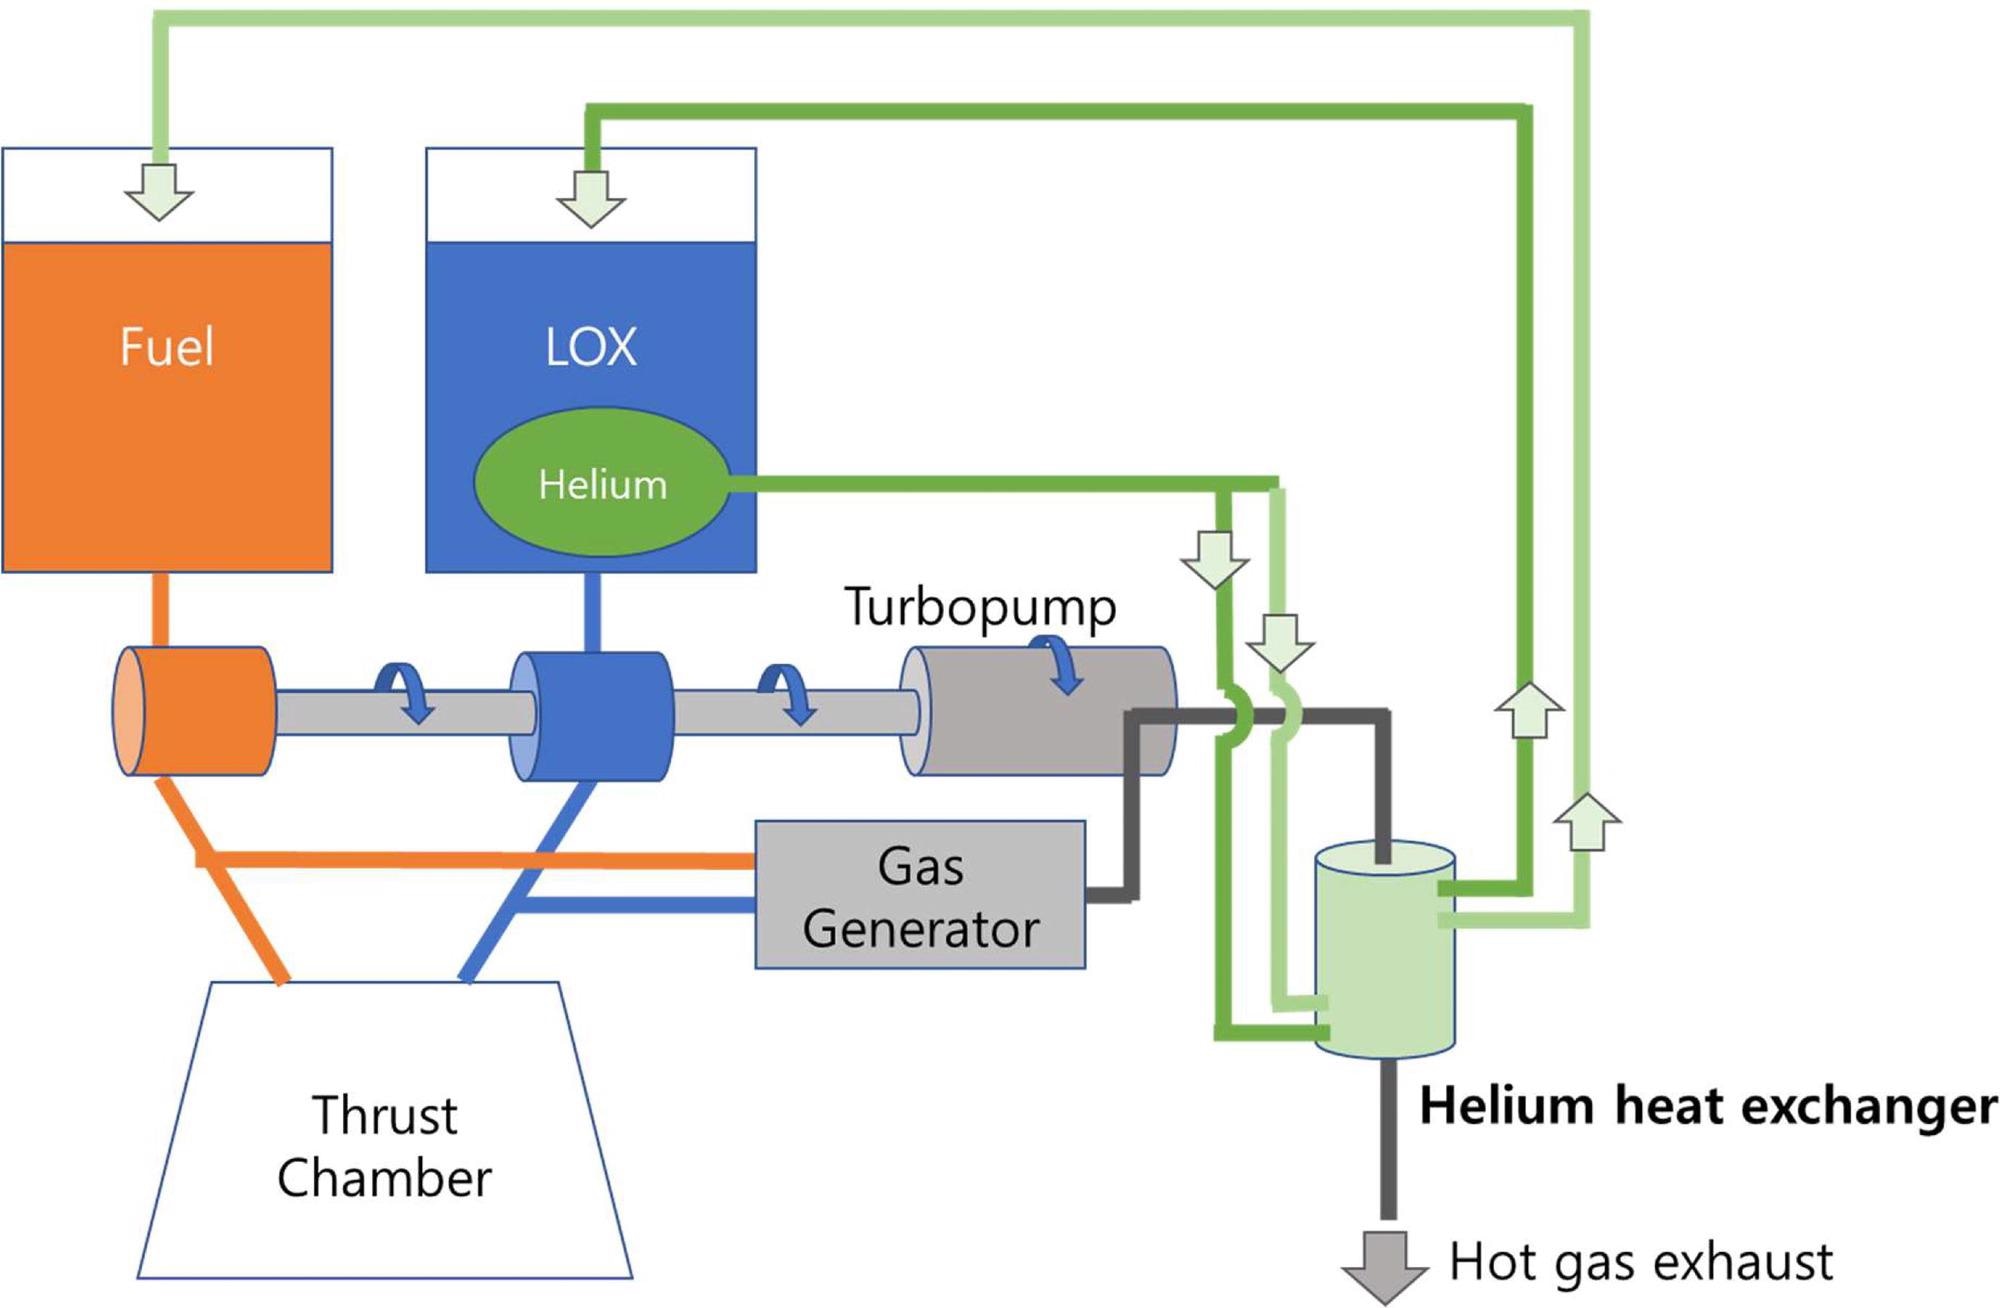 Schematic of a LOX–kerosene launcher propulsion system with a helium heat exchanger